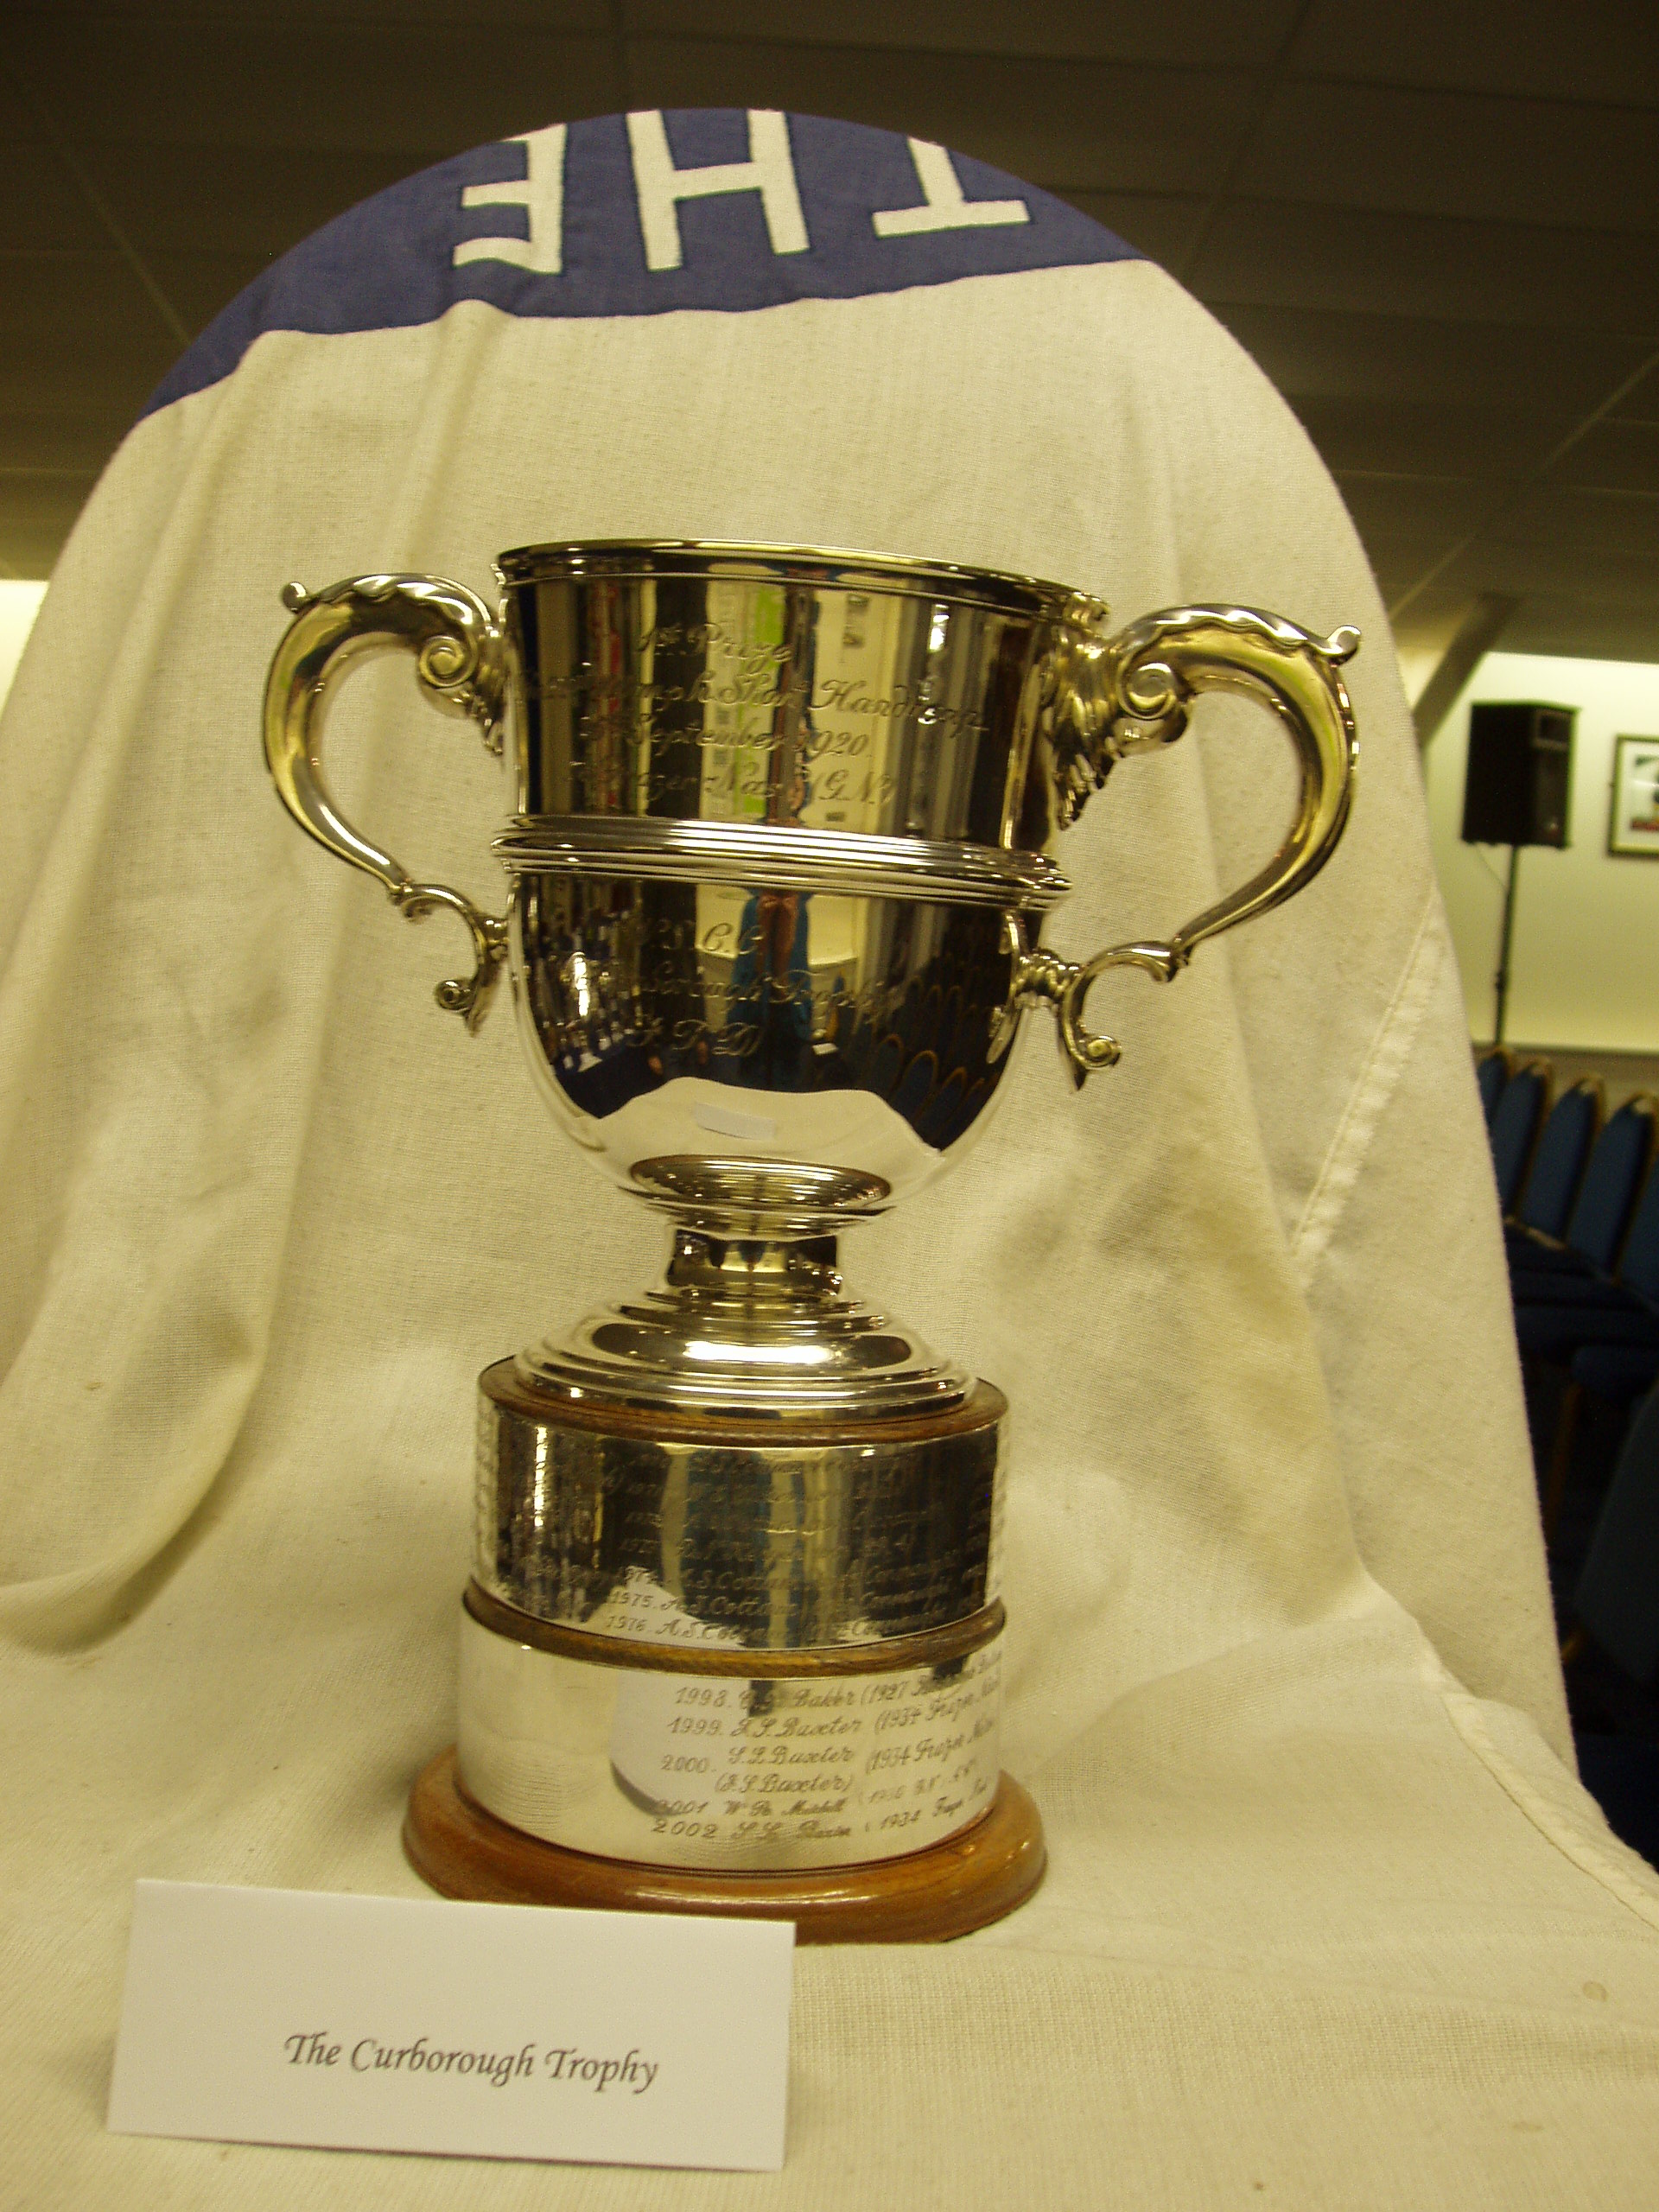 CURBOROUGH TROPHY cover